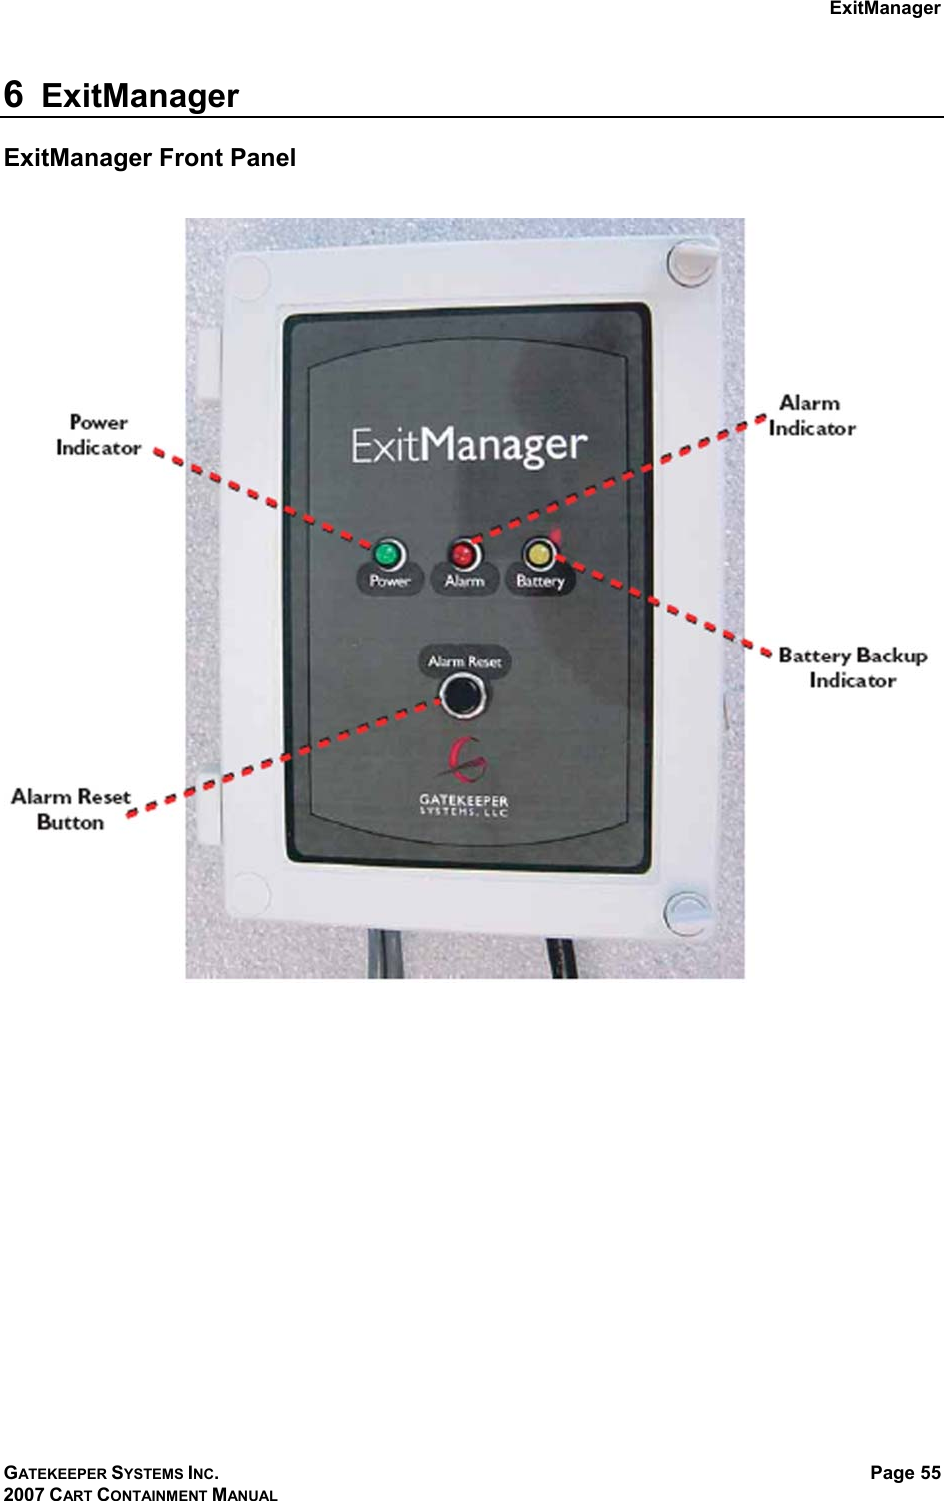 ExitManager GATEKEEPER SYSTEMS INC. 2007 CART CONTAINMENT MANUAL Page 55  6  ExitManager ExitManager Front Panel   